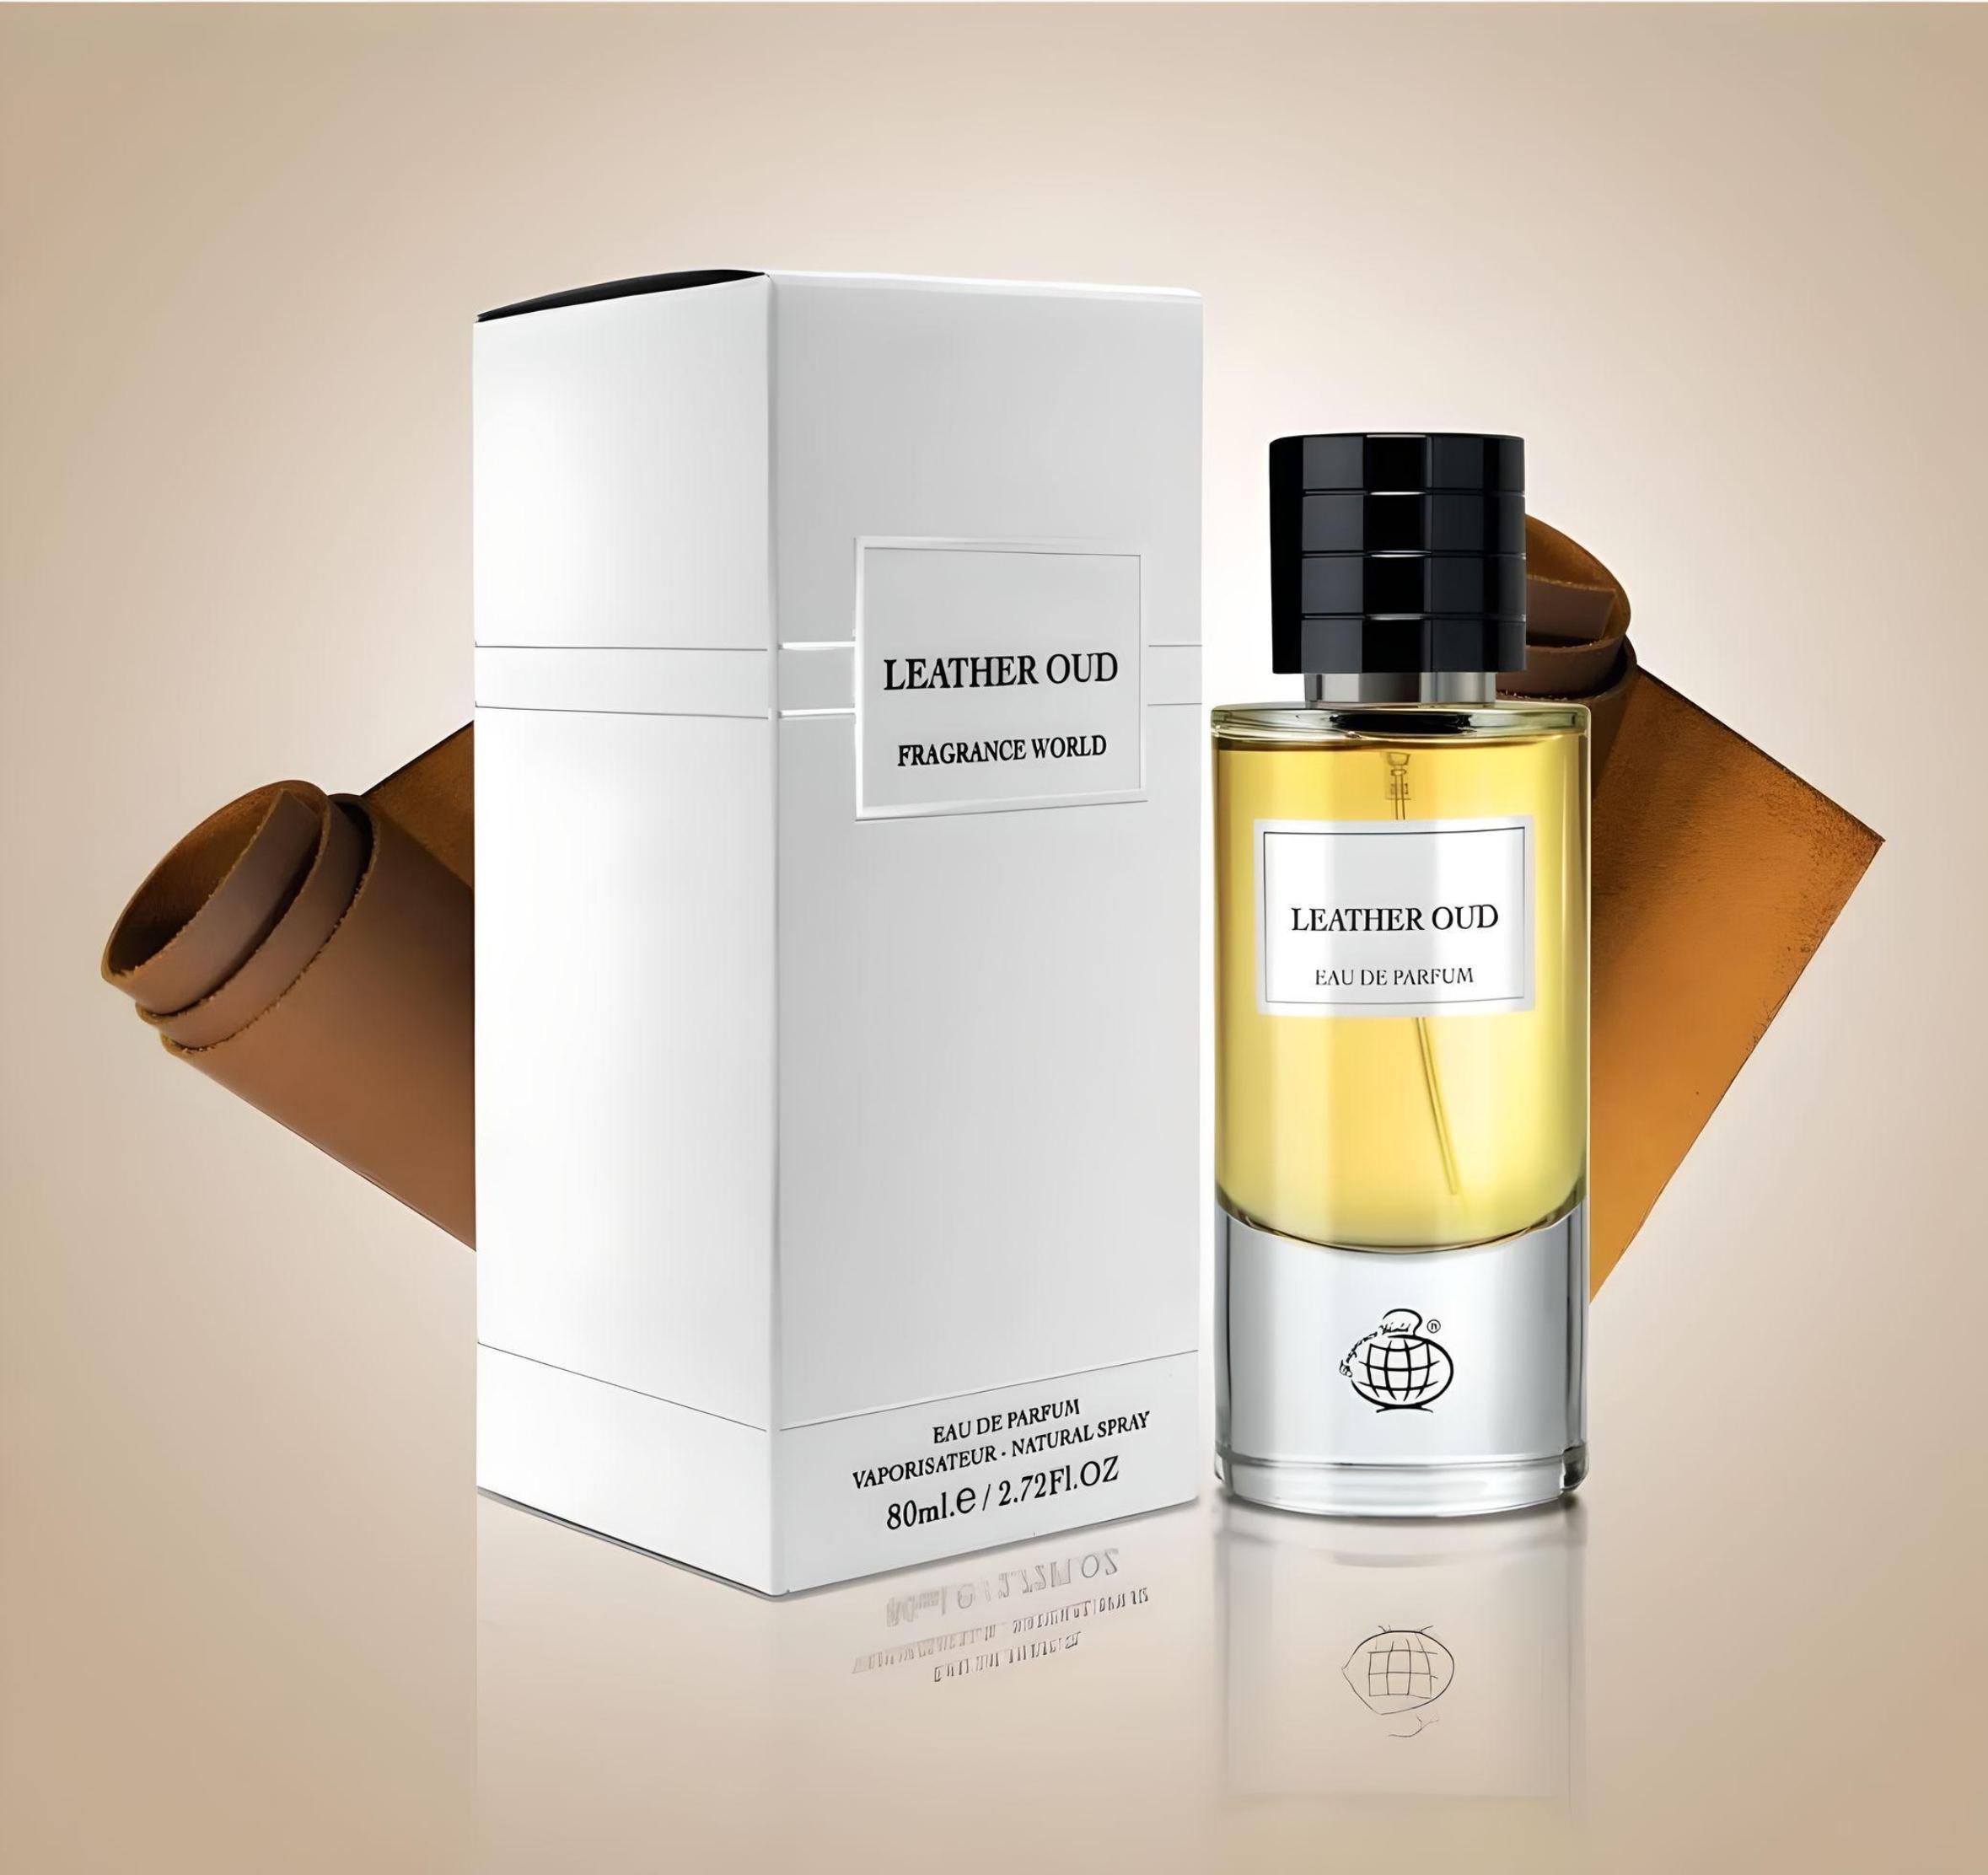 Leather Oud Perfume / Eau De Parfum By Fragrance World (Inspired By Leather Oud)